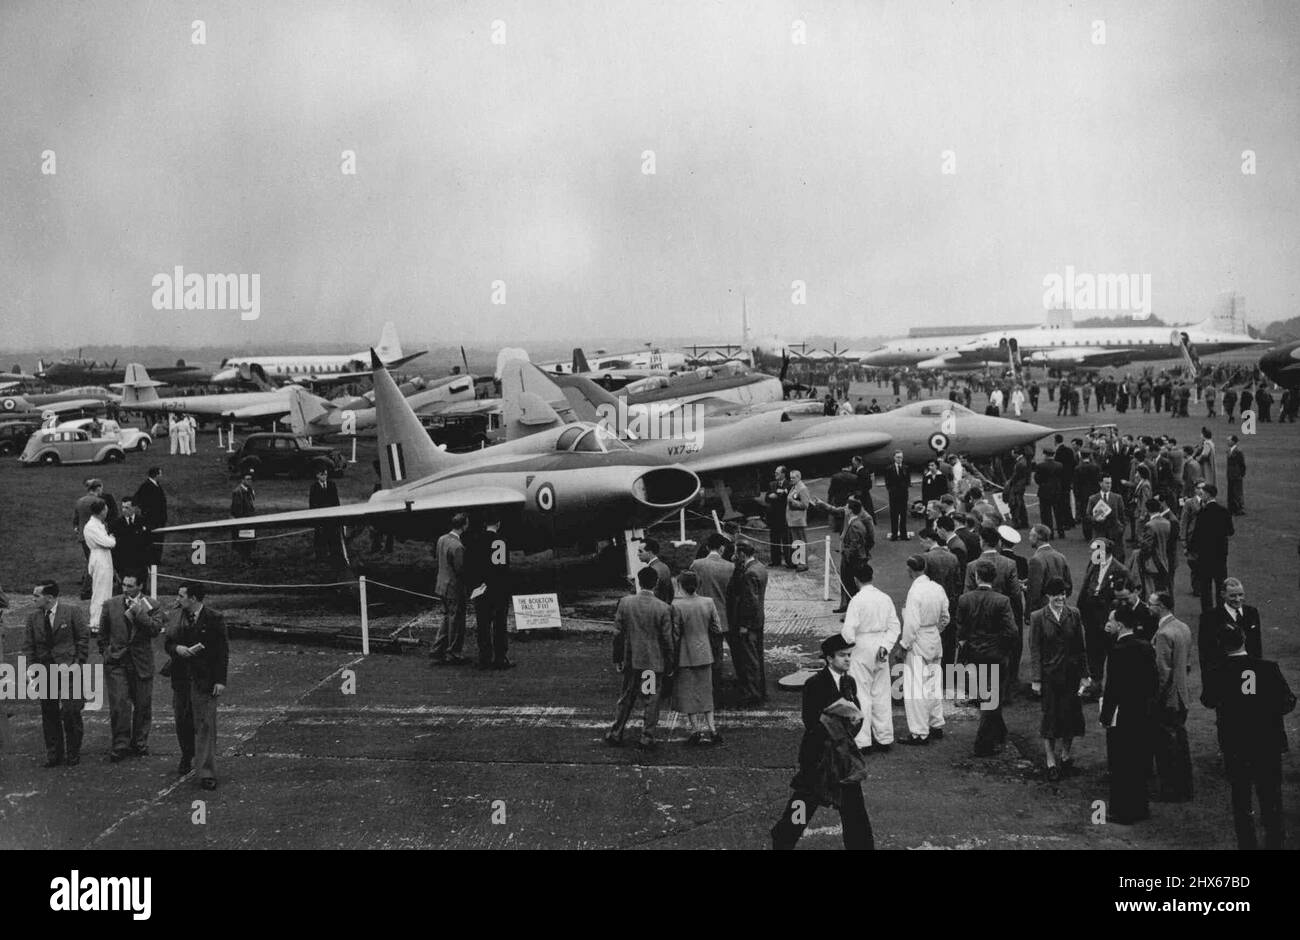 Jets On Parade. Britain's latest jets predominate and are most popular among the crowds at the opening of the great Society of British Aircraft Constructors Show the world's biggest at Farnborough, Hampshire, today (Tuesday). September 11, 1951. (Photo by Reuterphoto). Stock Photo